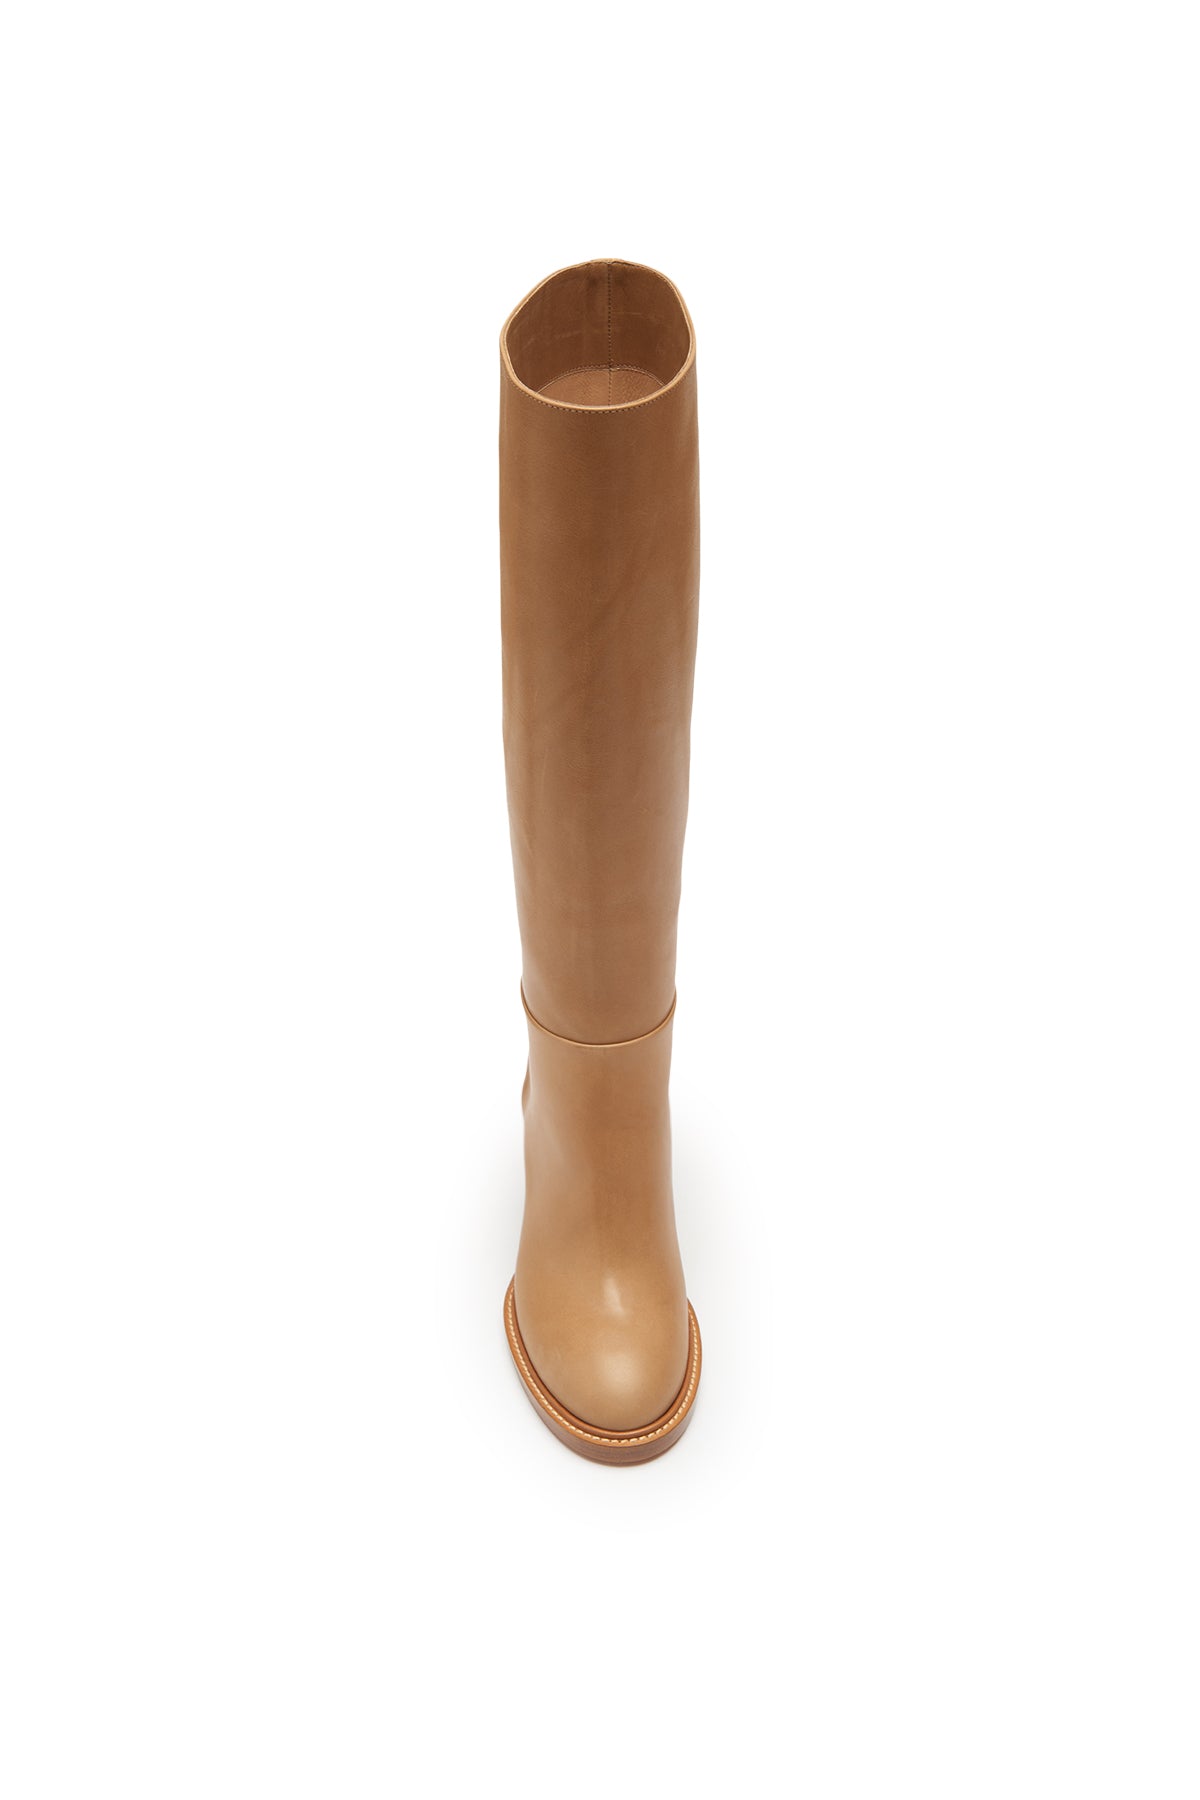 Bocca Knee High Boot in Dark Camel Leather